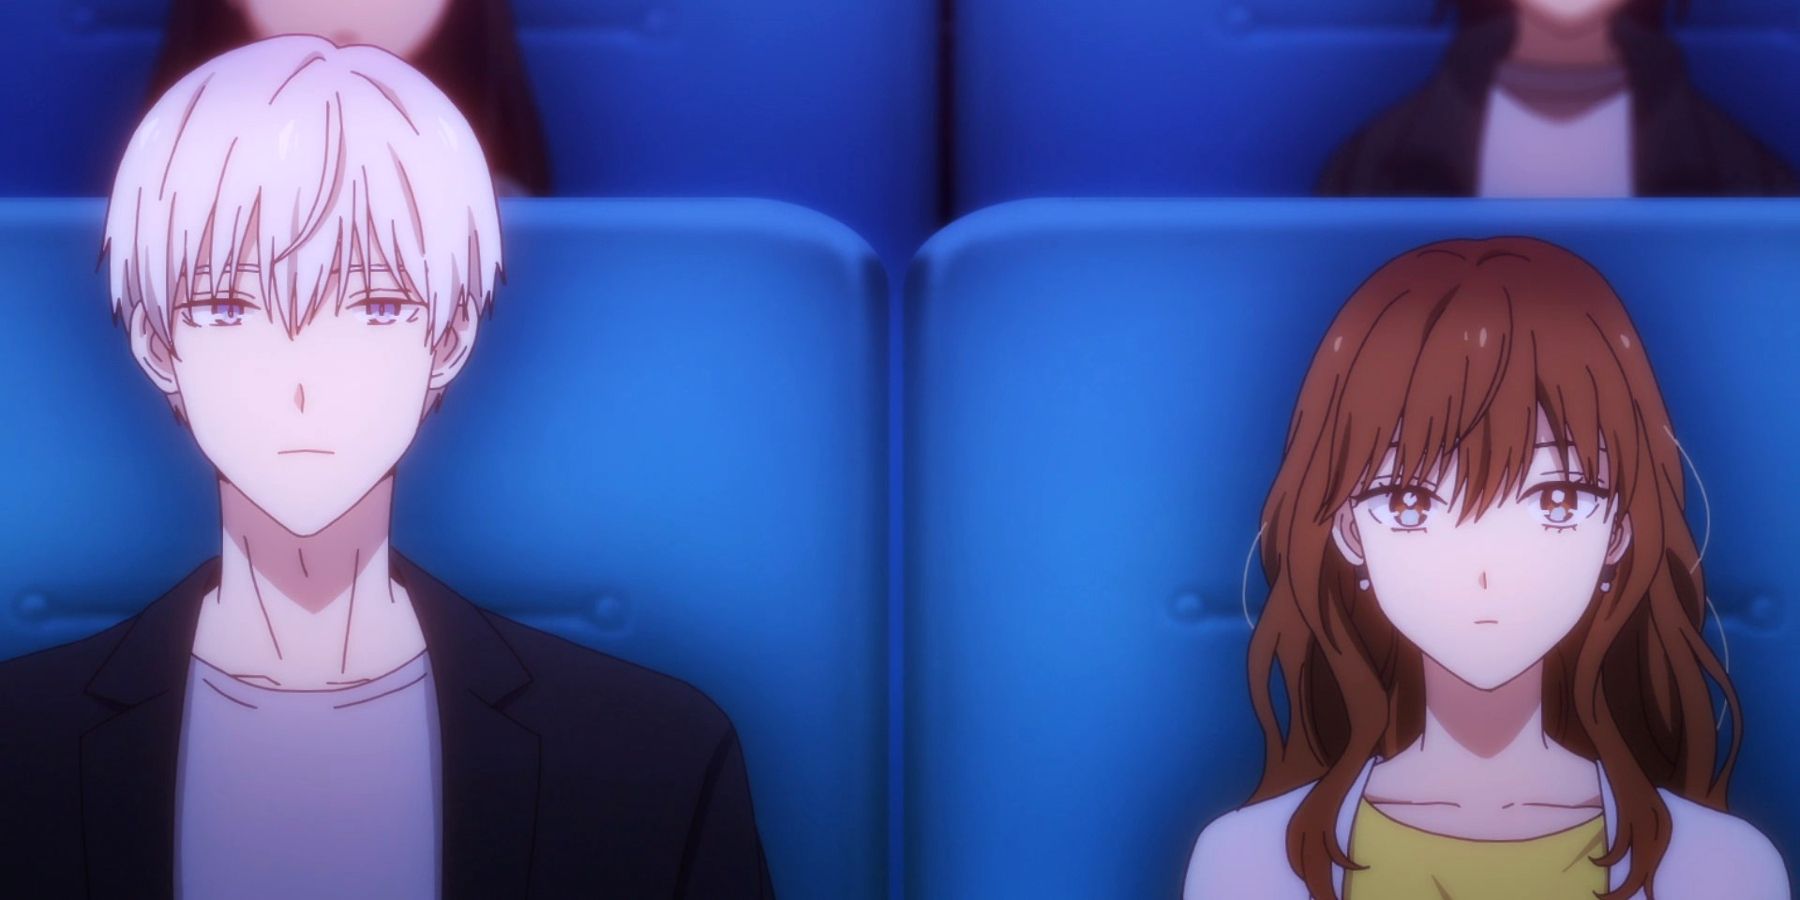 Ice Guy and His Cool Female Colleague Episode 4 Is a Quality Slow Burn